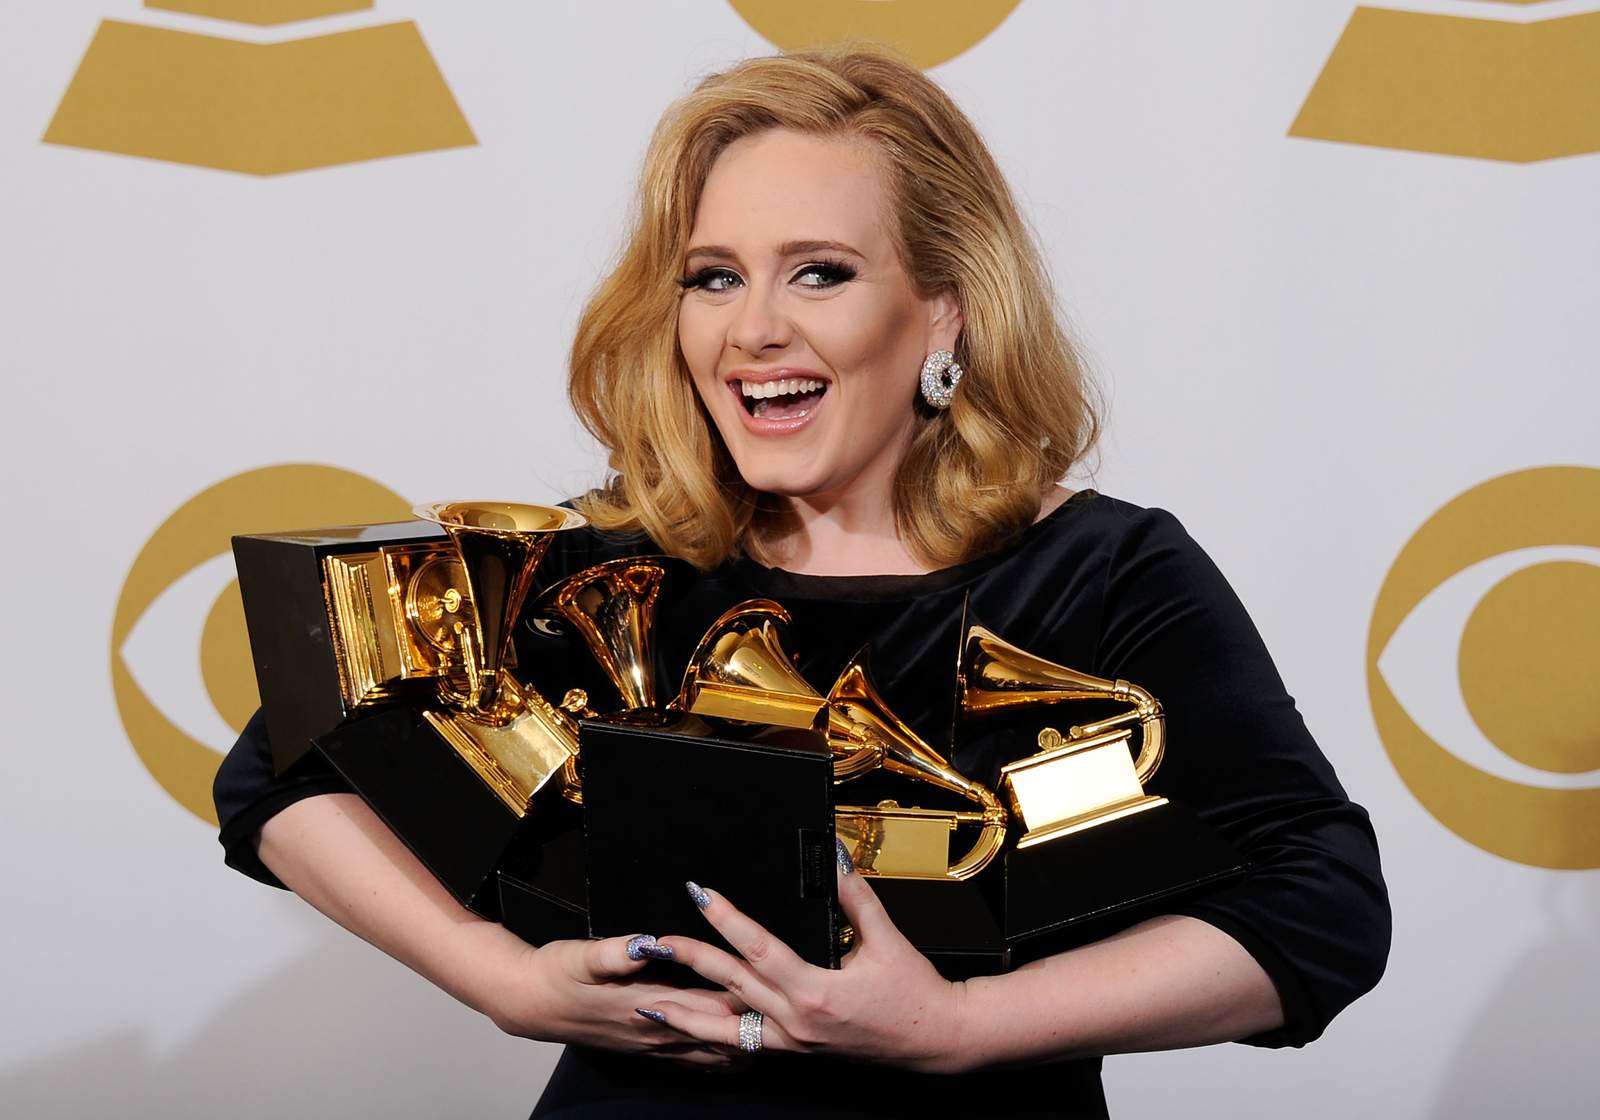 Which is your favorite album from Grammy winners? Weigh in